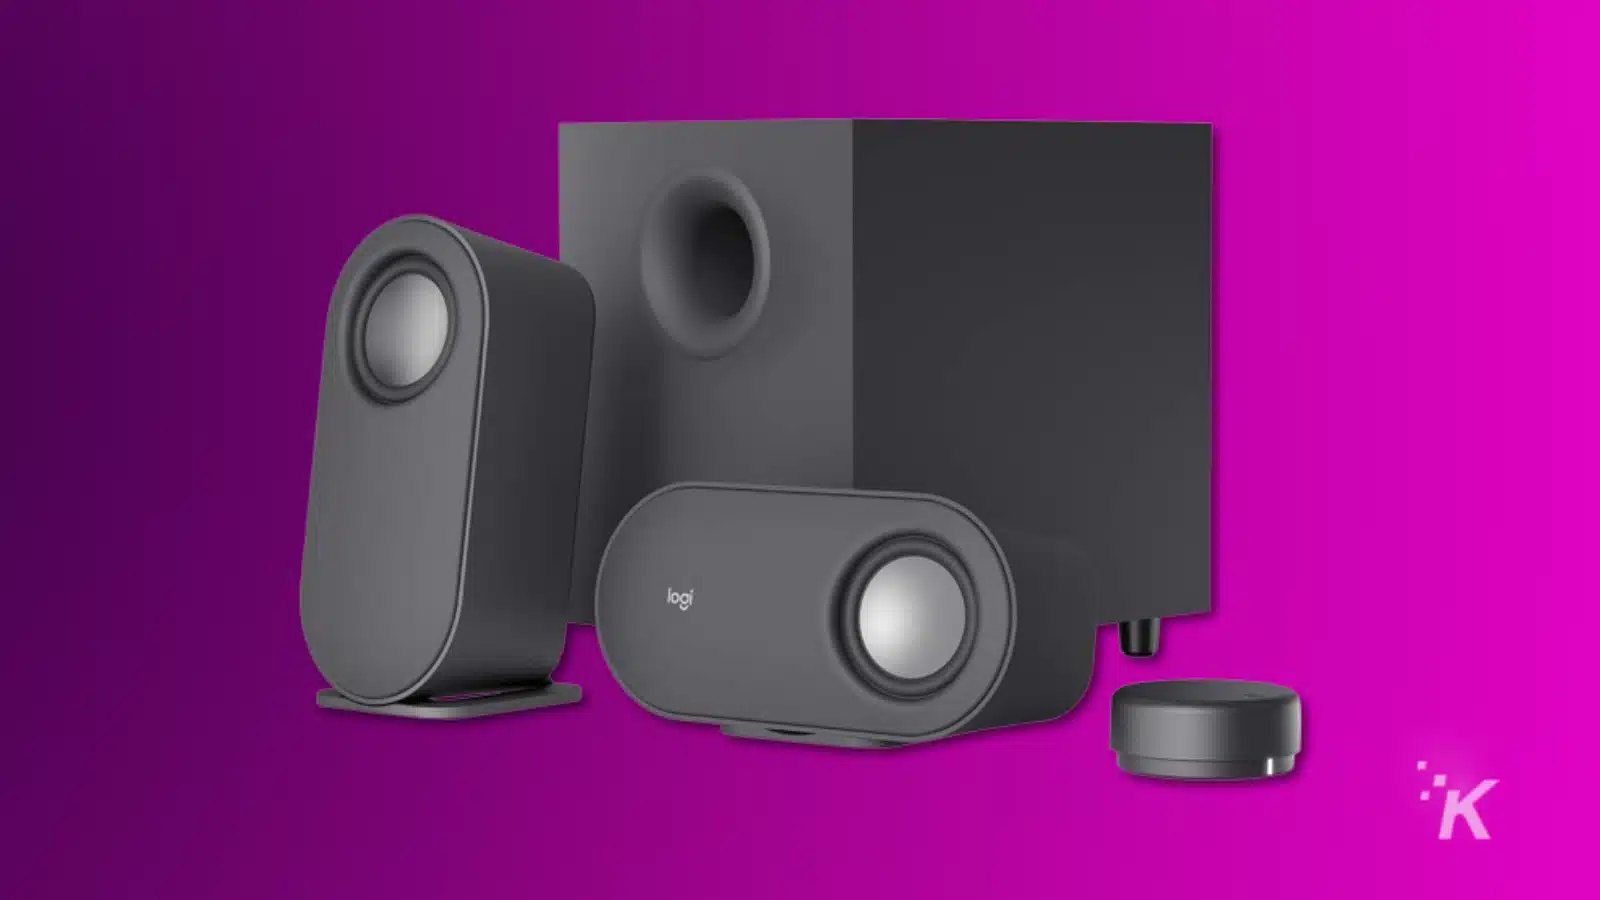 Render of logitech z407 gaming speakers on a purple background